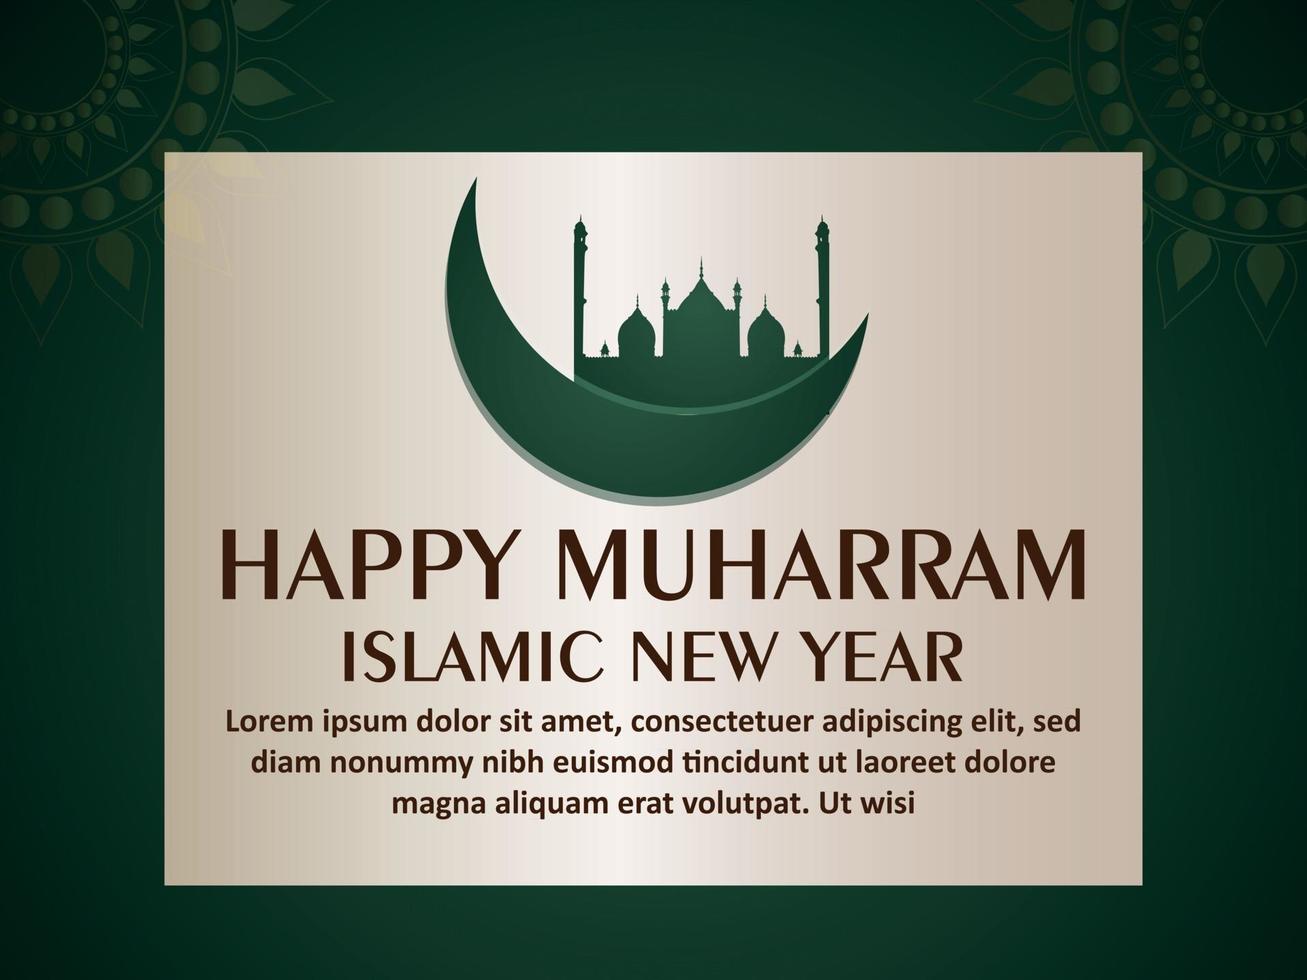 Happy muharram islamic new year celebration greeting card with mosque vector